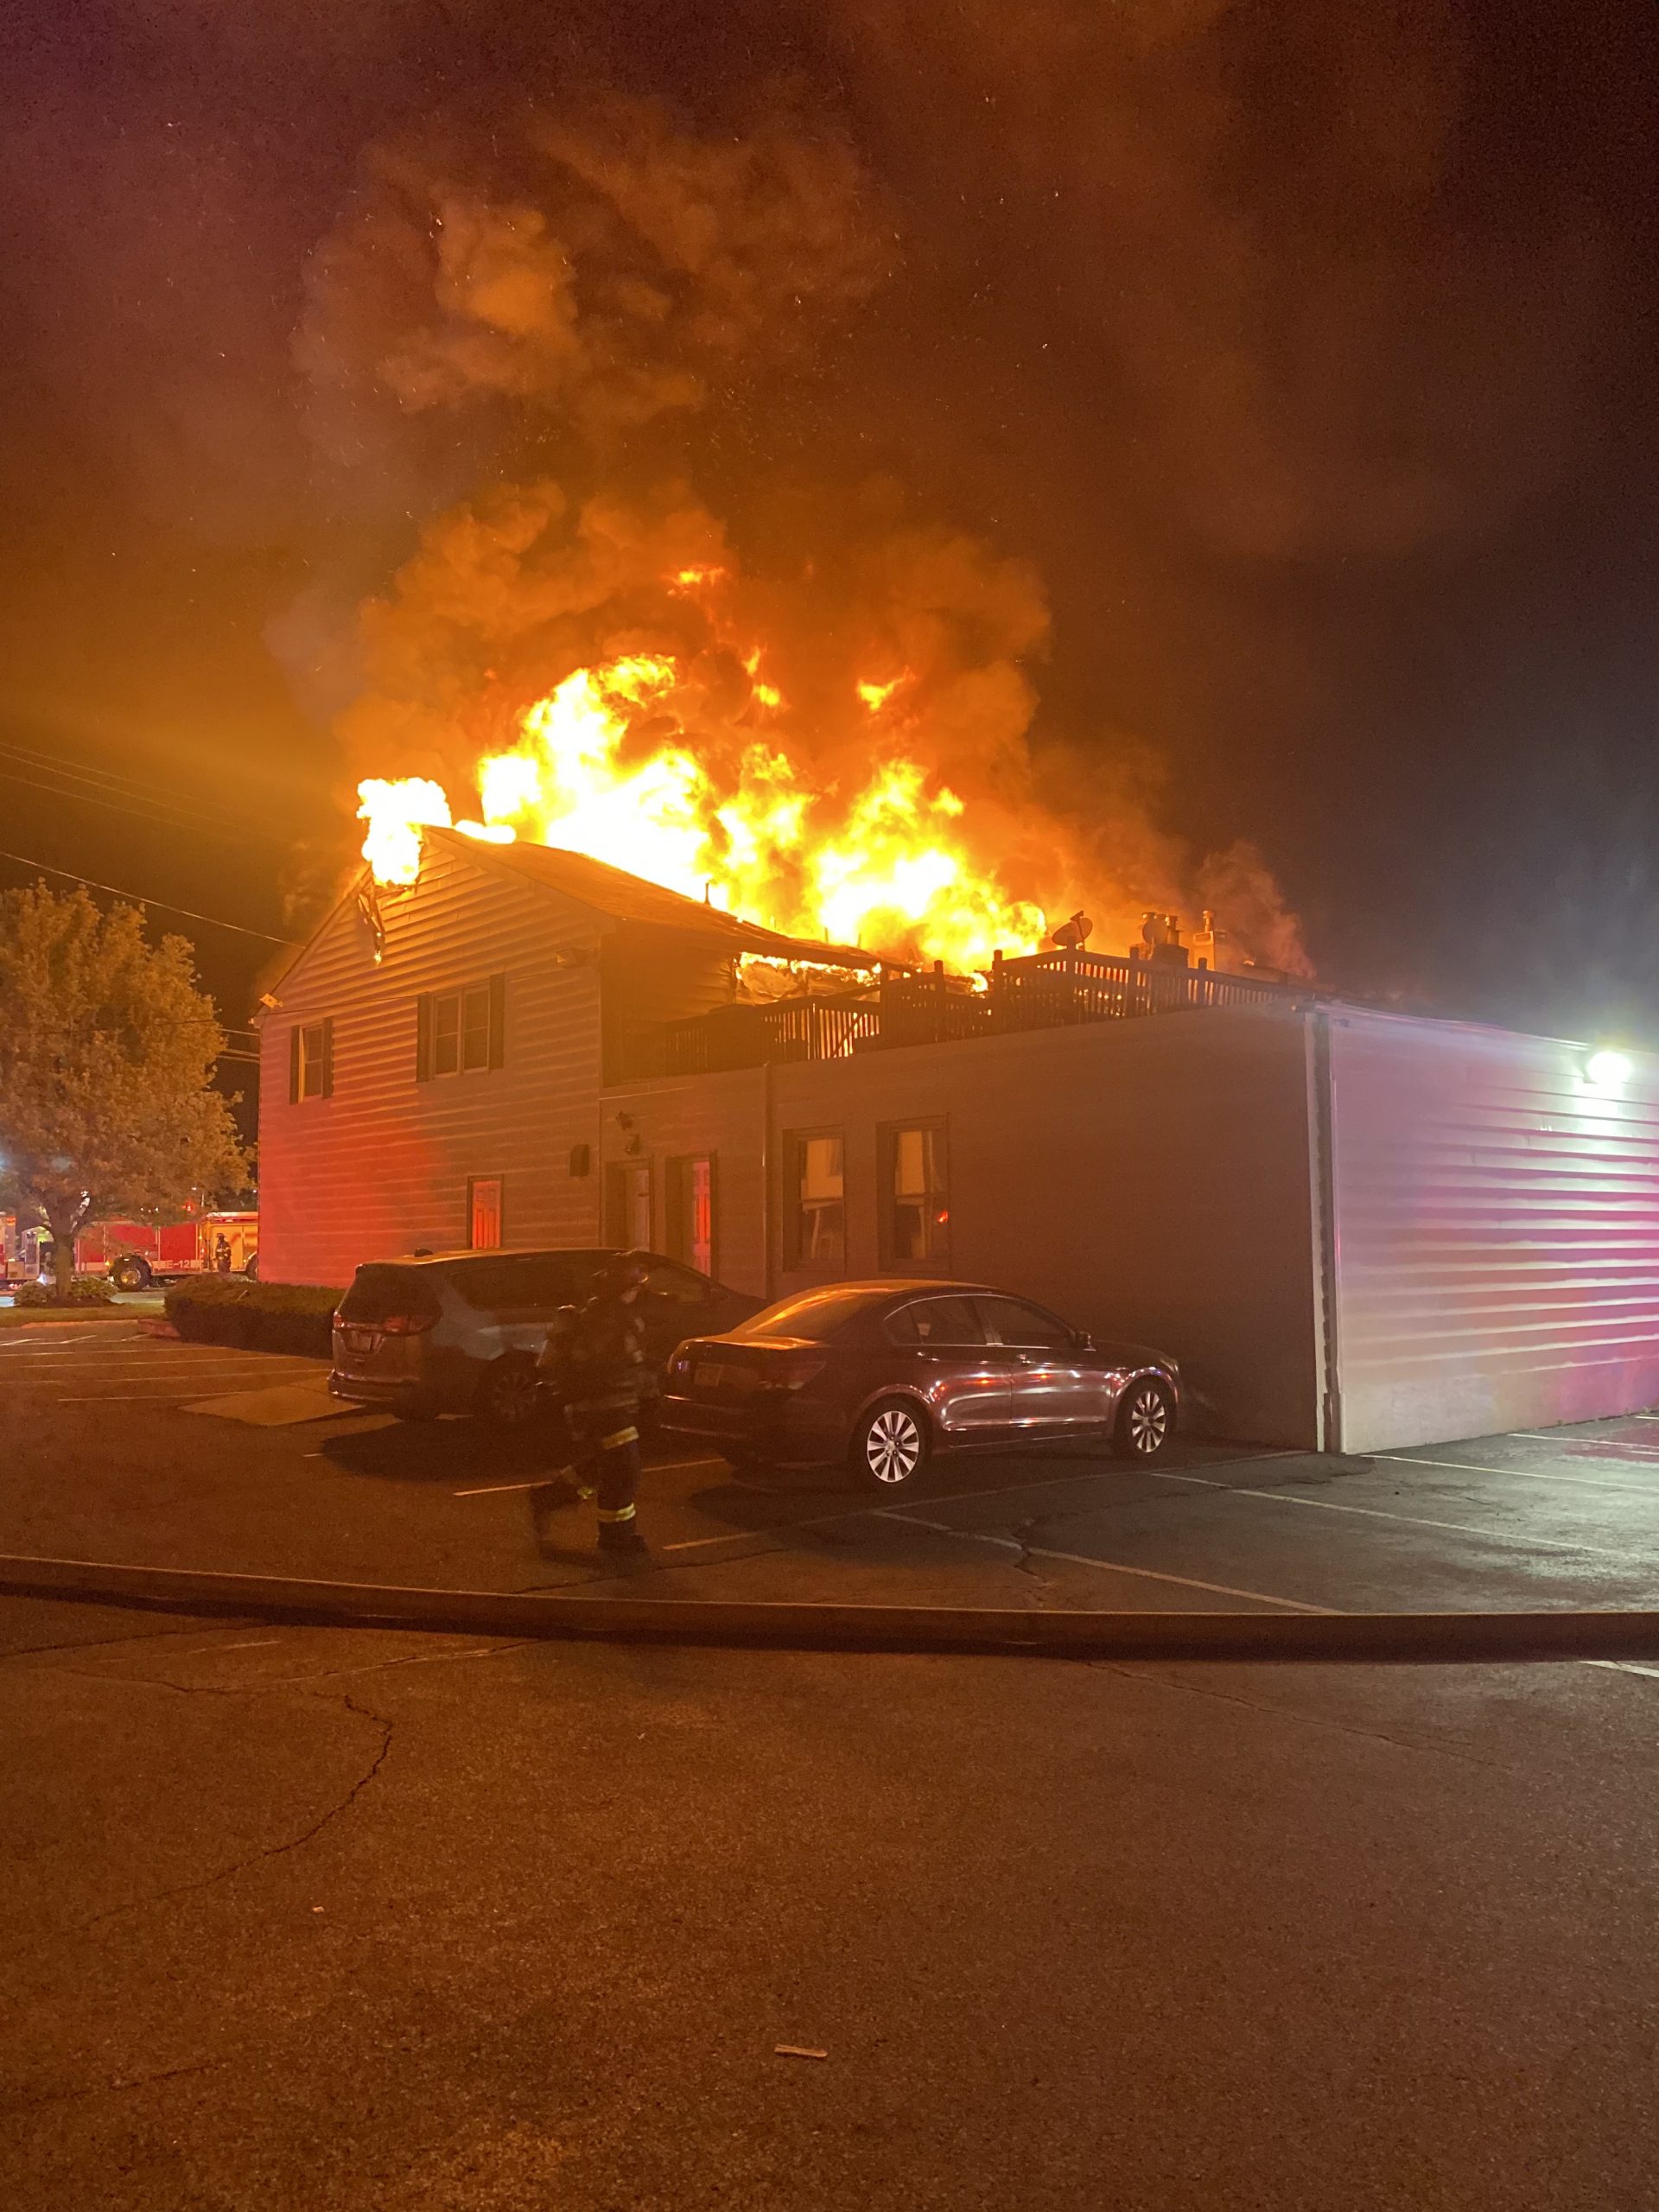 Holtsville FD Responds as RIT to Mutual Aid Structure Fire